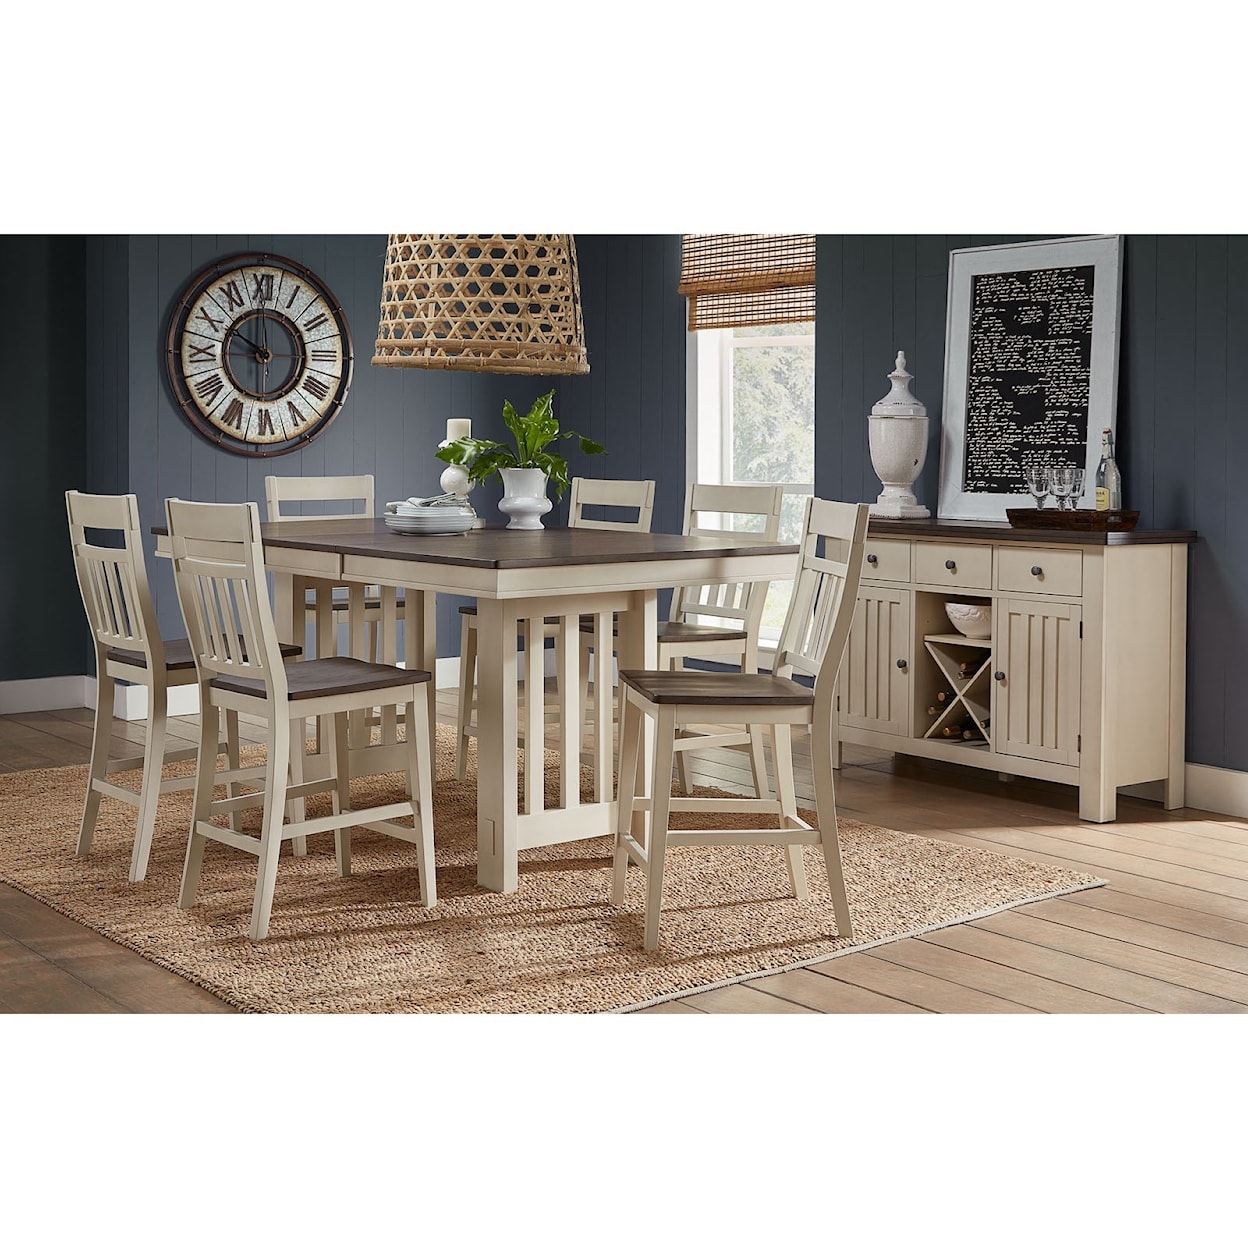 AAmerica Bremerton 7-Piece Pub Table and Chair Set